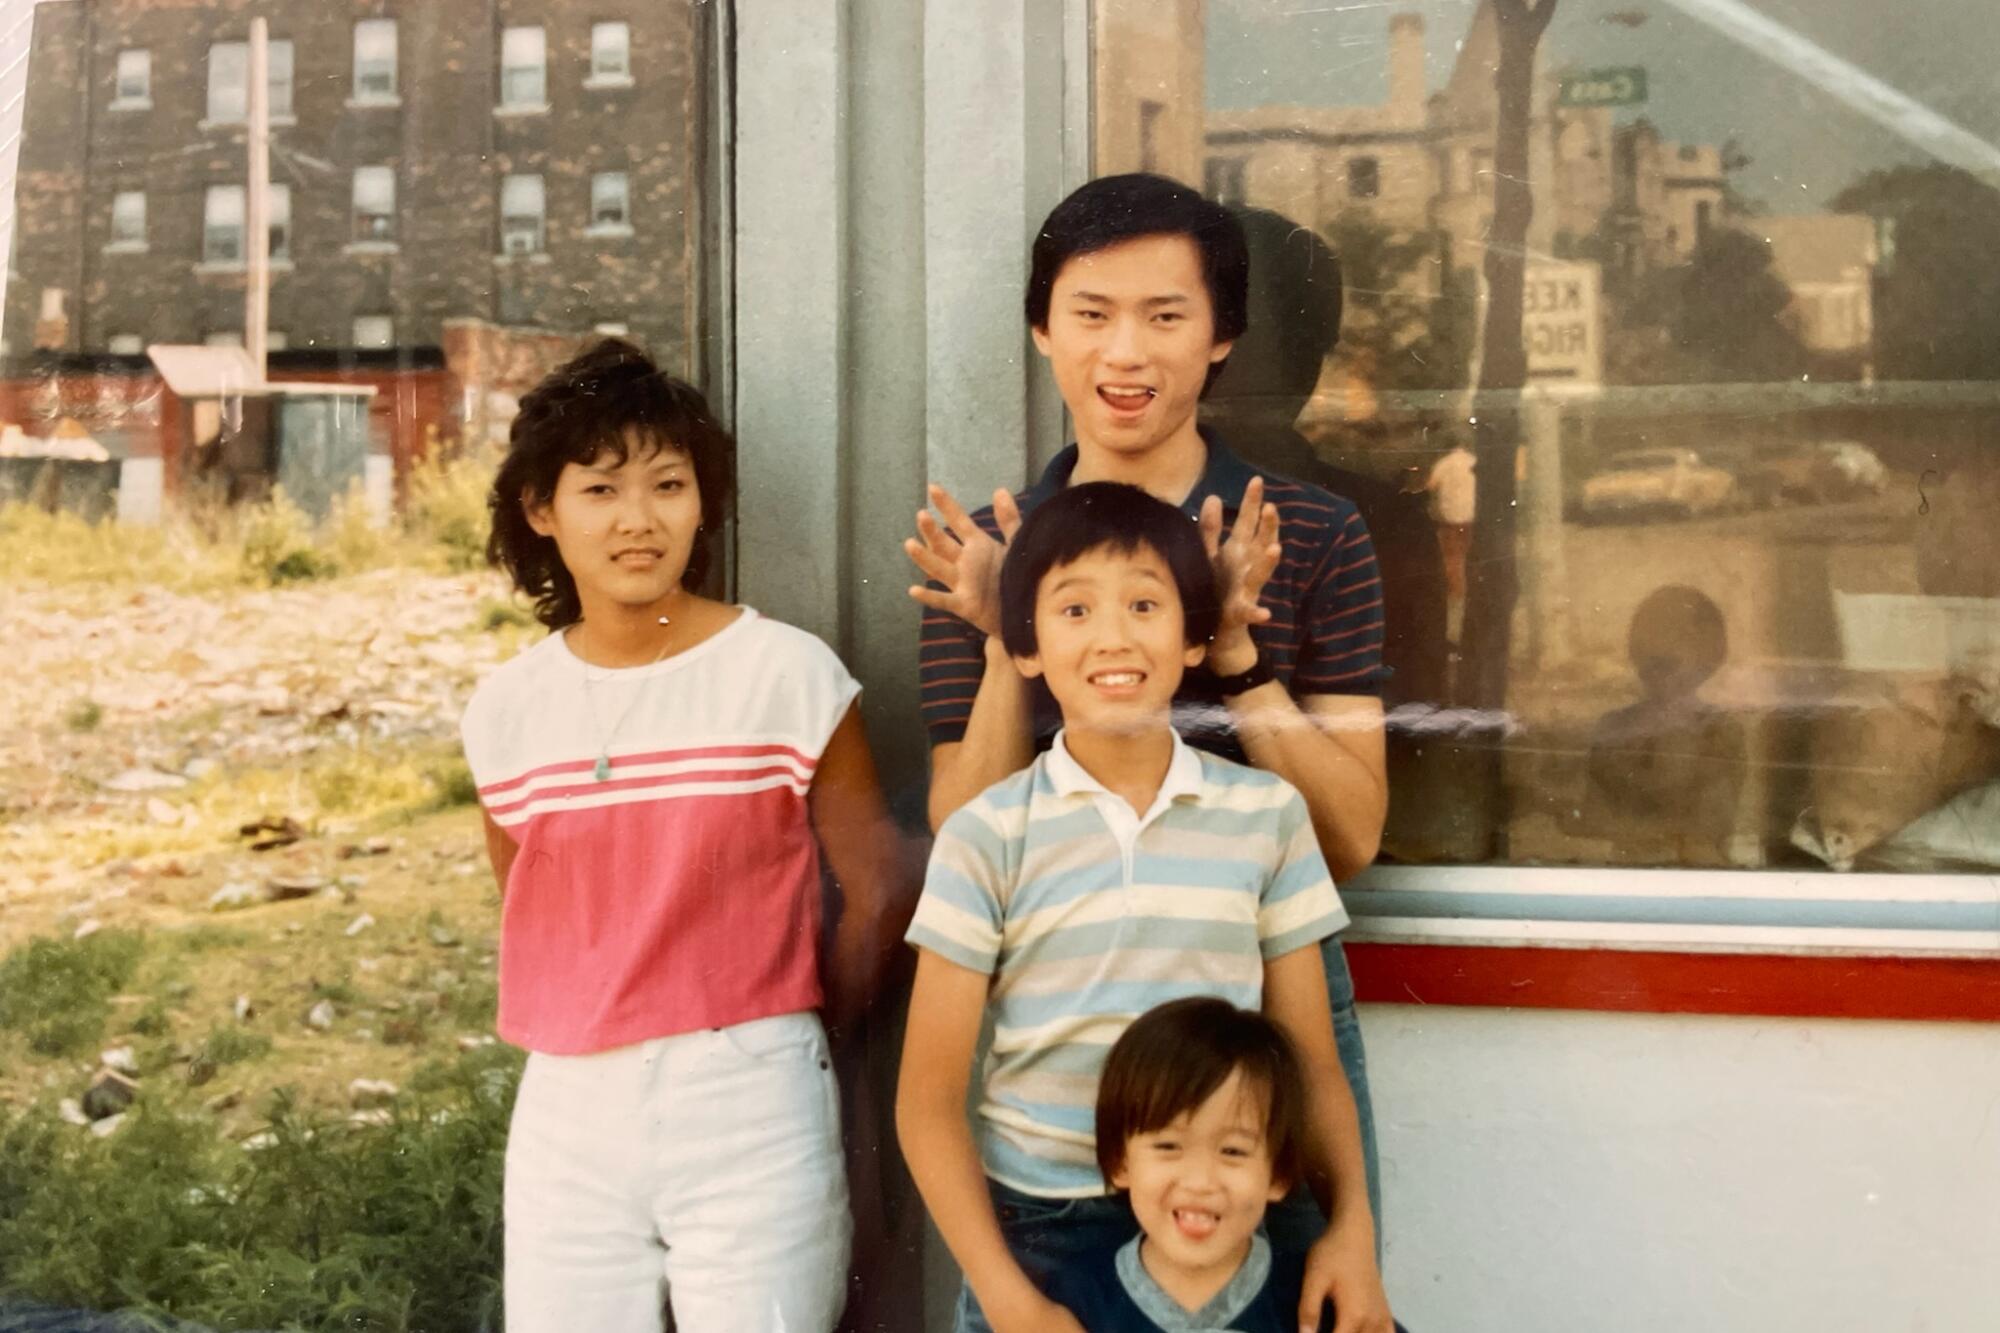 Four kids and teenagers standing in front of a restaurant storefront.